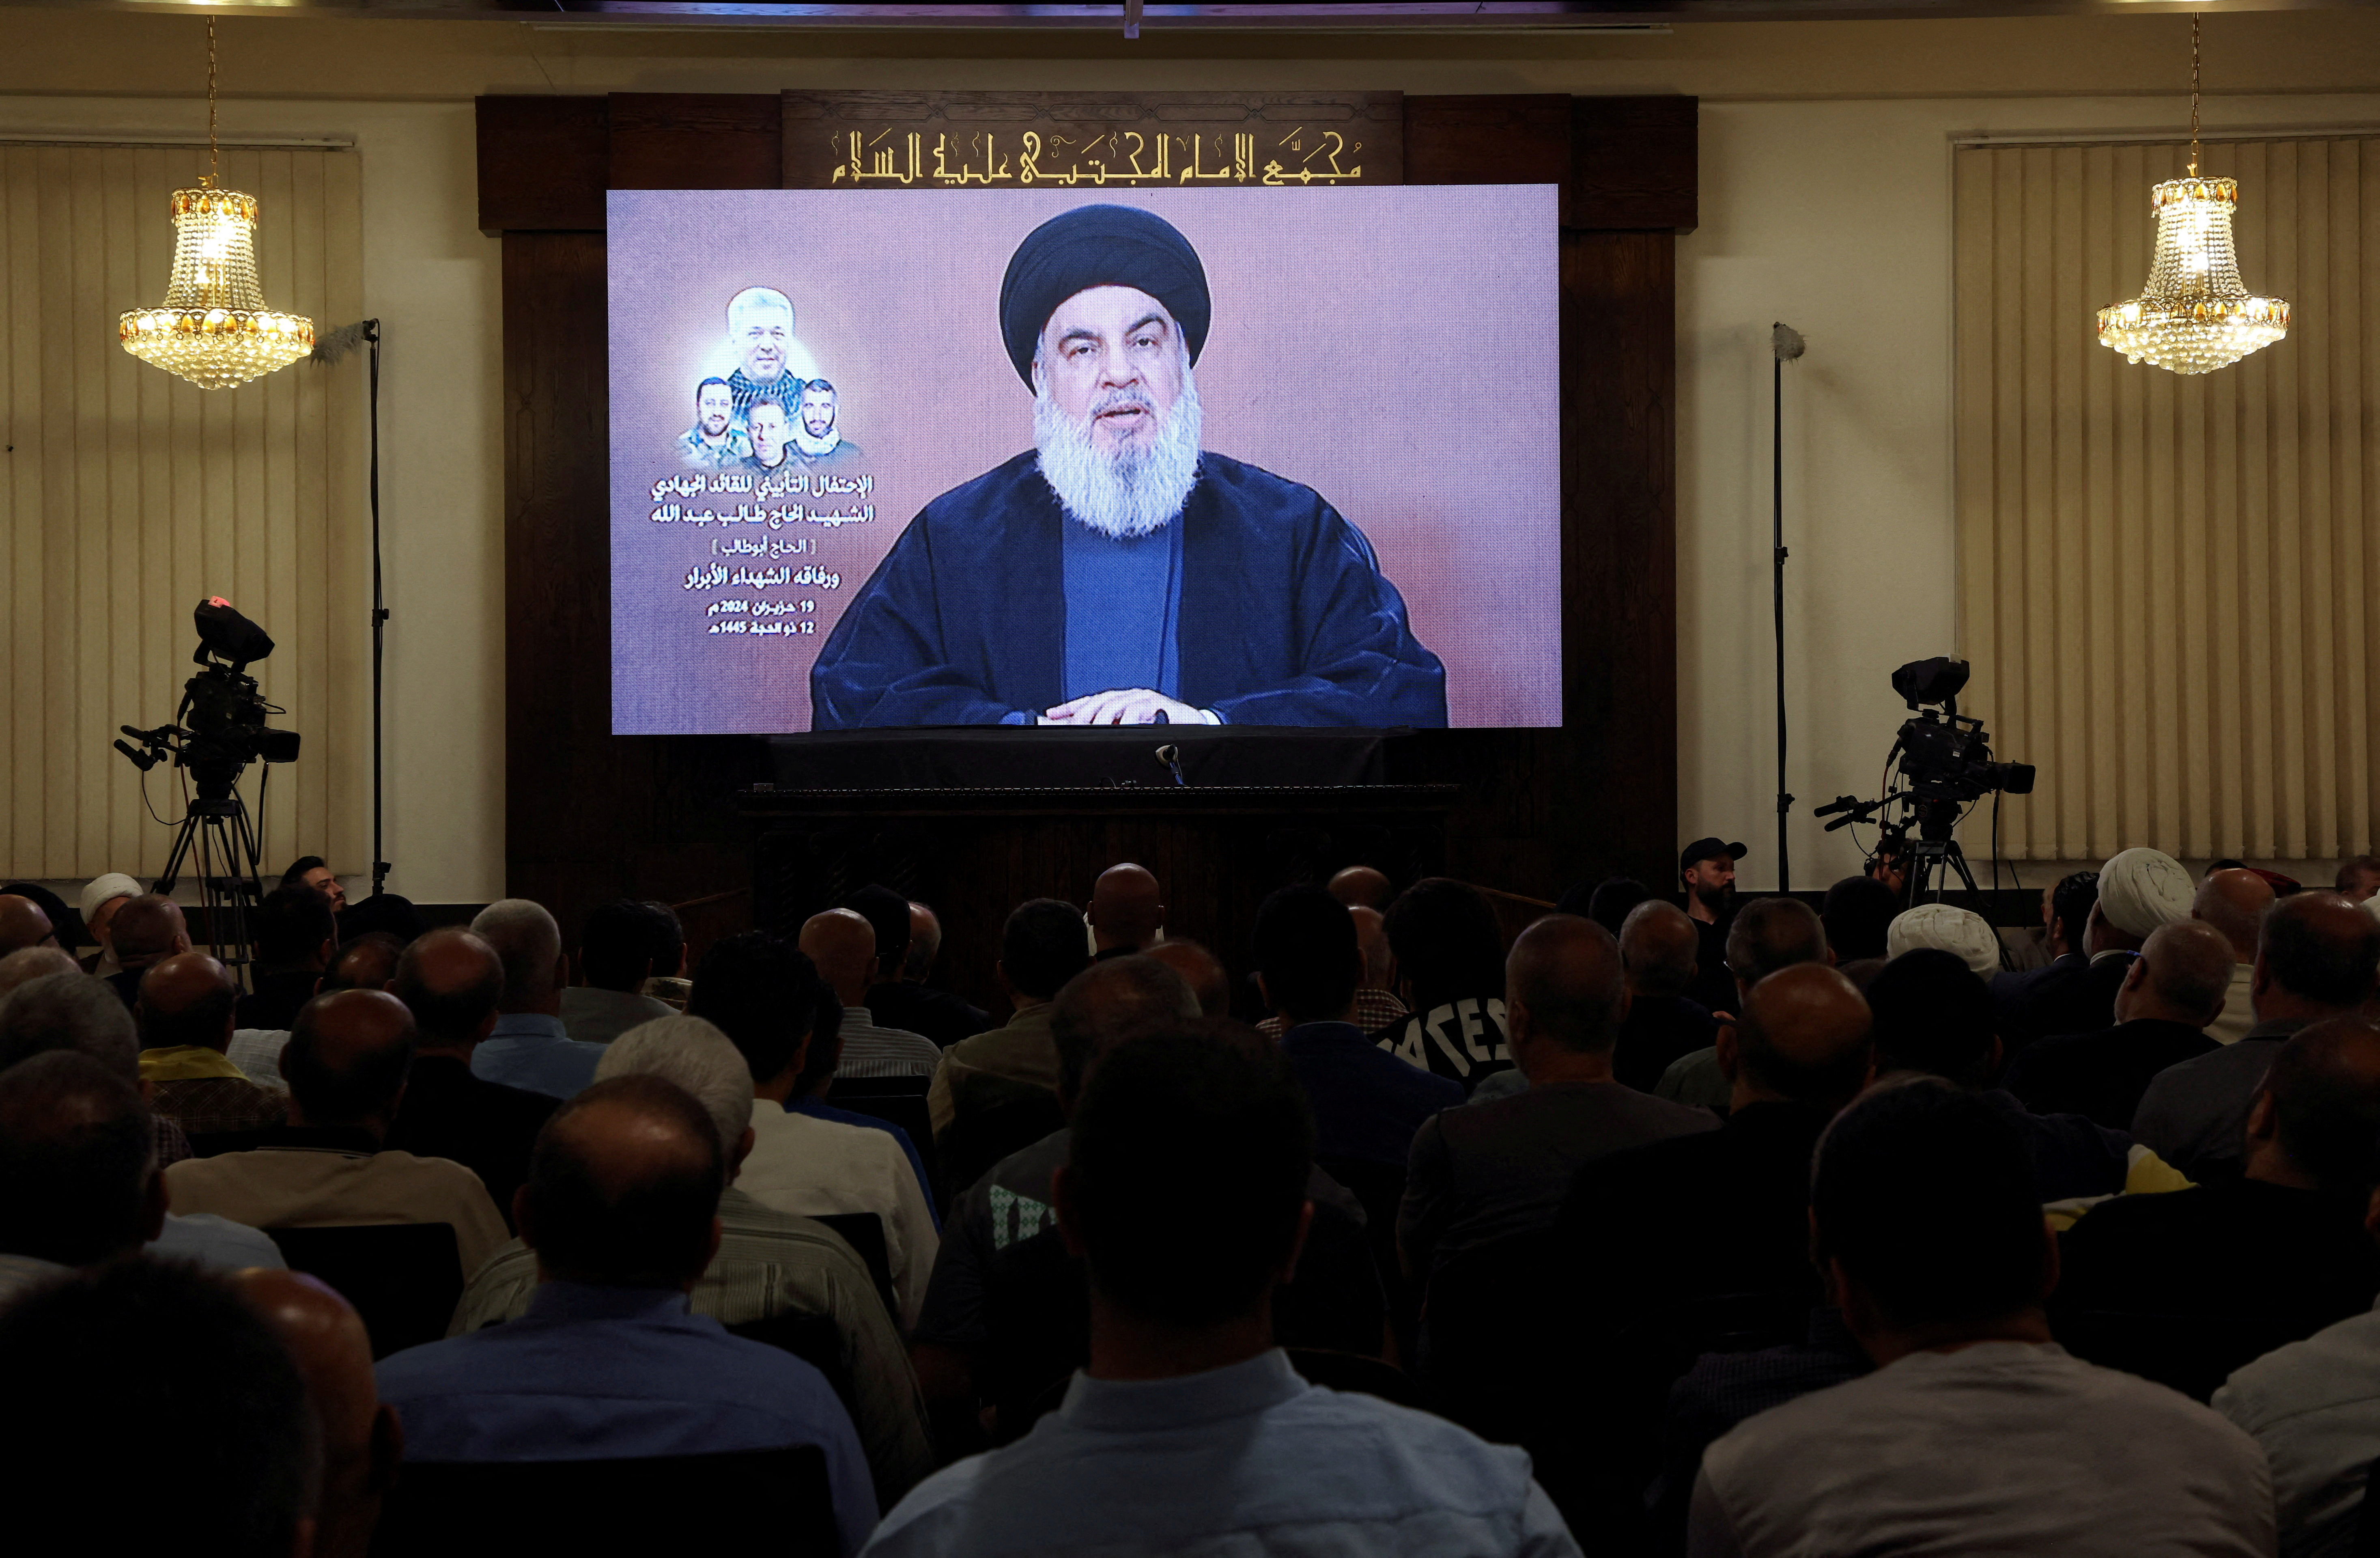 Lebanon's Hezbollah leader Sayyed Hassan Nasrallah speaks during a televised address at a memorial service in Beirut's southern suburbs